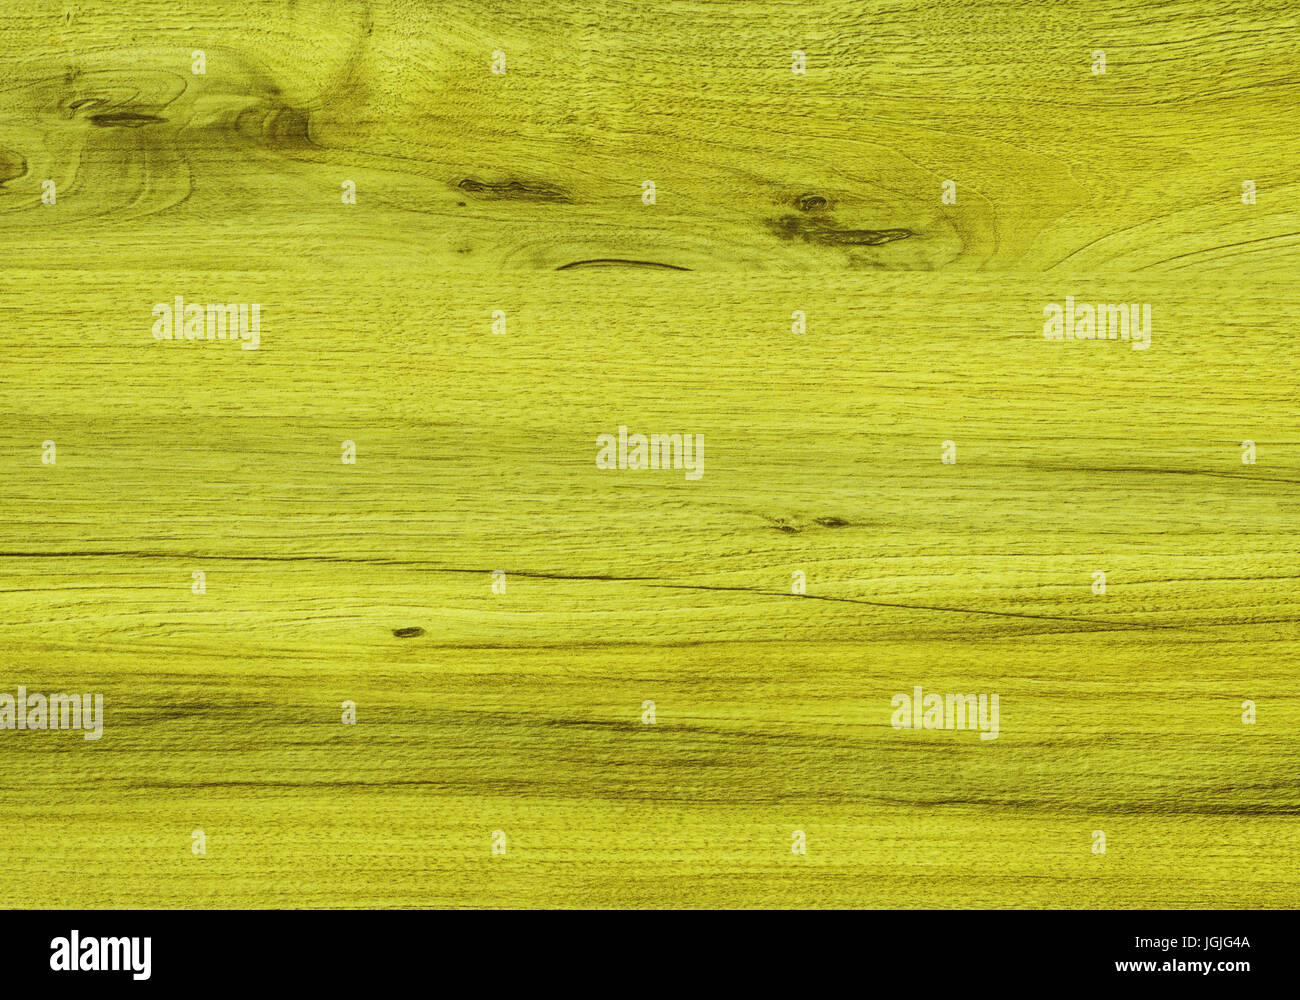 yellow wooden planks, wood texture background, texture Stock Photo